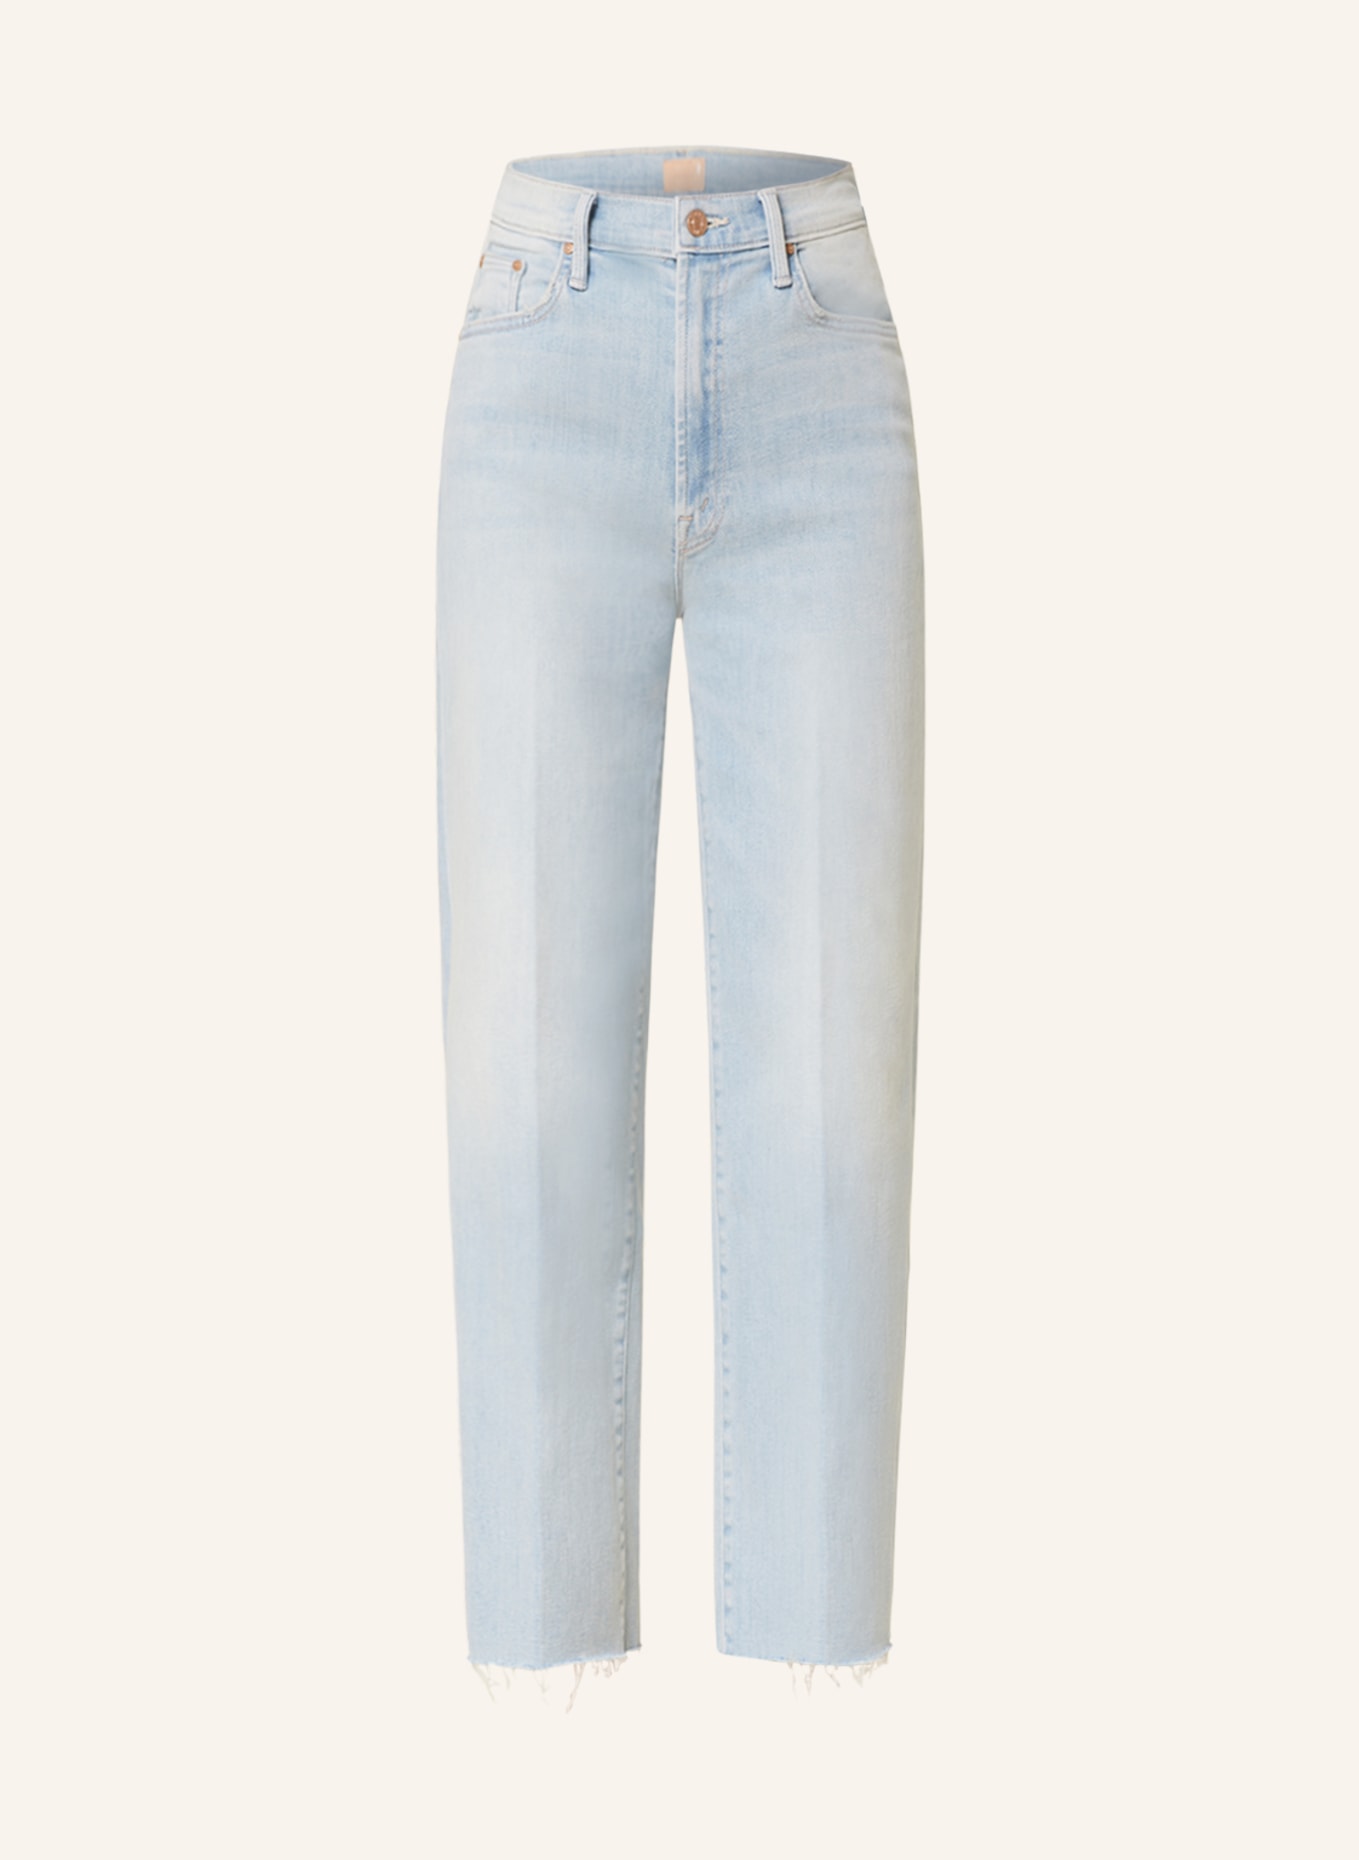 MOTHER Straight Jeans, Farbe: CPL super hell (Bild 1)